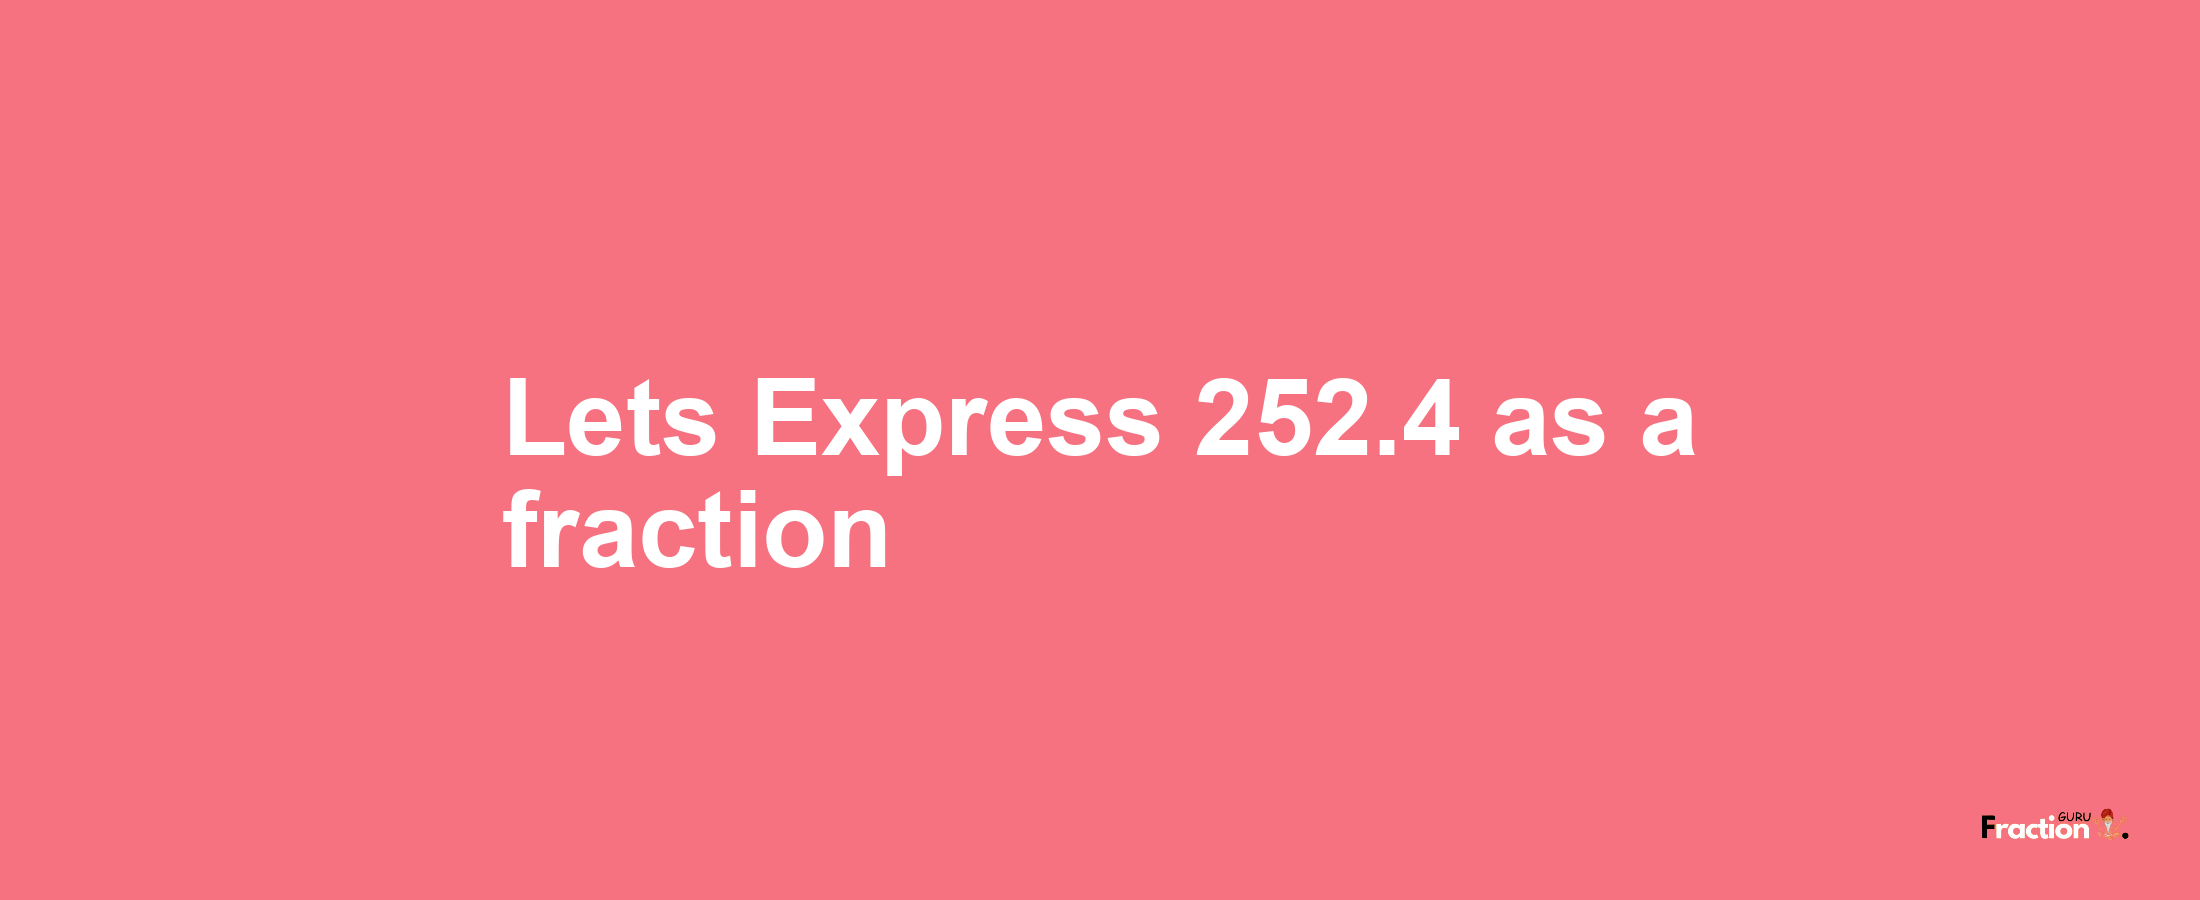 Lets Express 252.4 as afraction